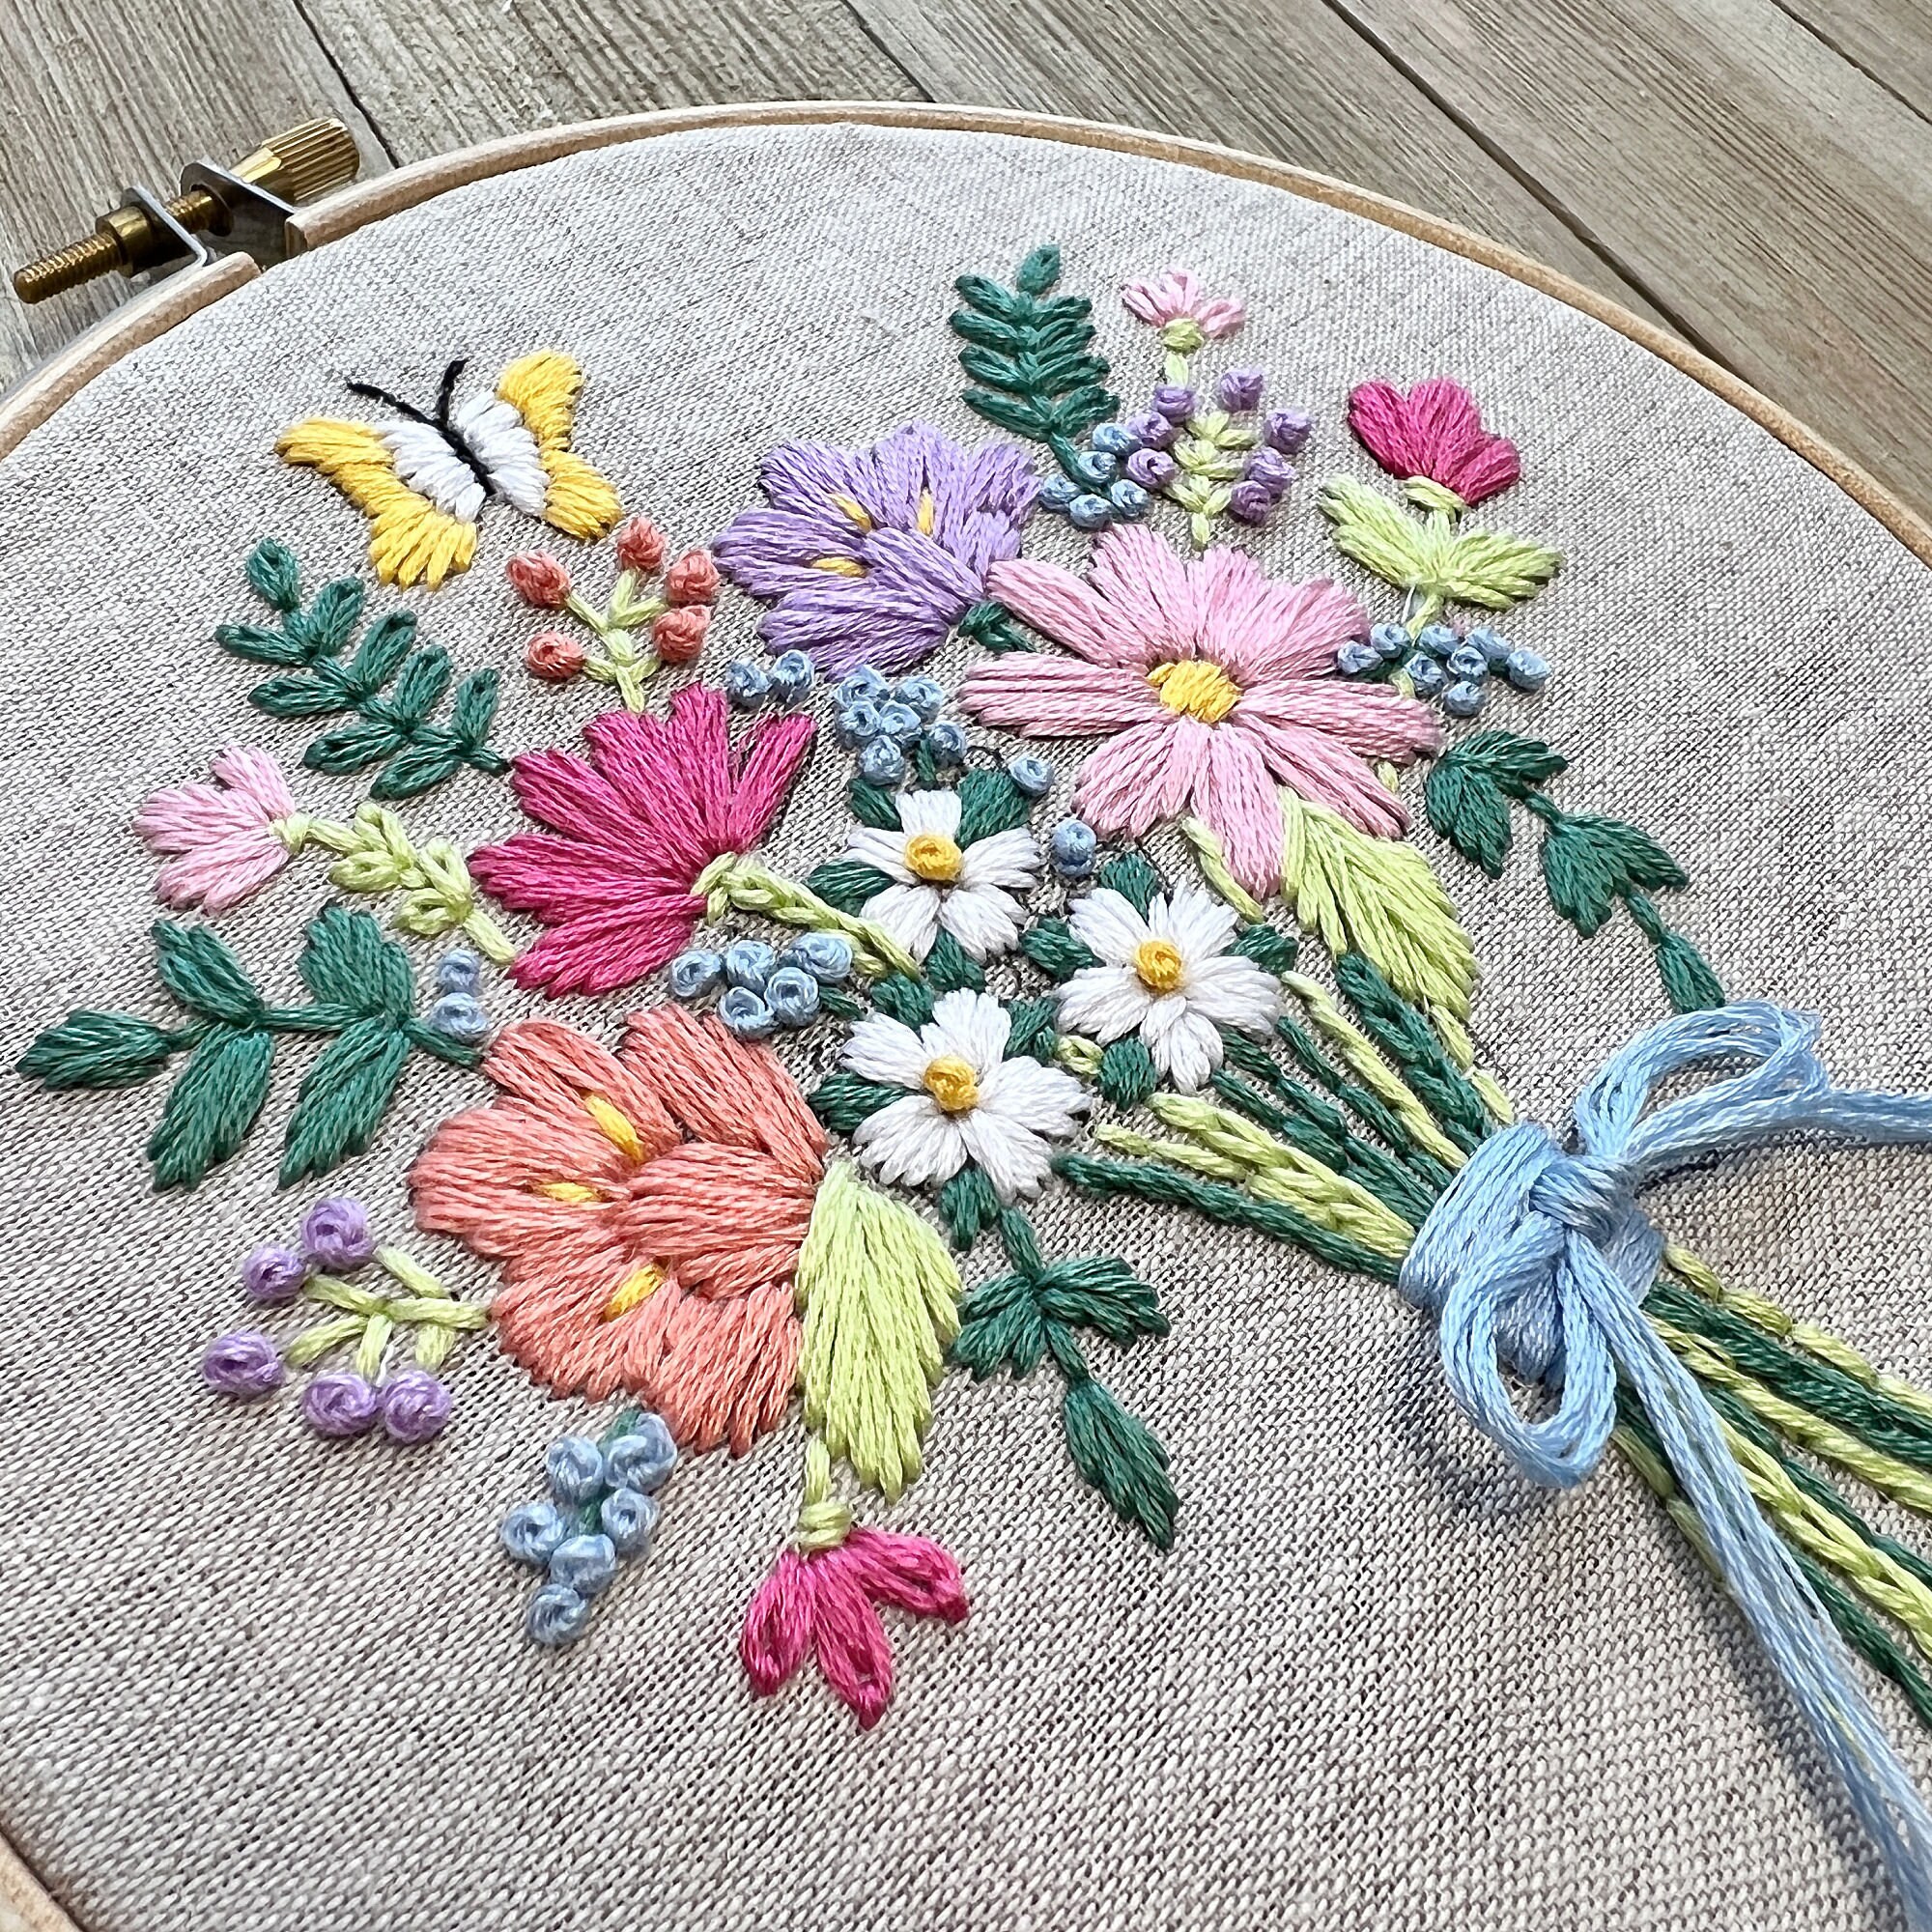 Floral Bouquet Beginner Embroidery Kit DIY Gift for Mother's Day Flower  Embroidery DIY Craft Kit for Adults 